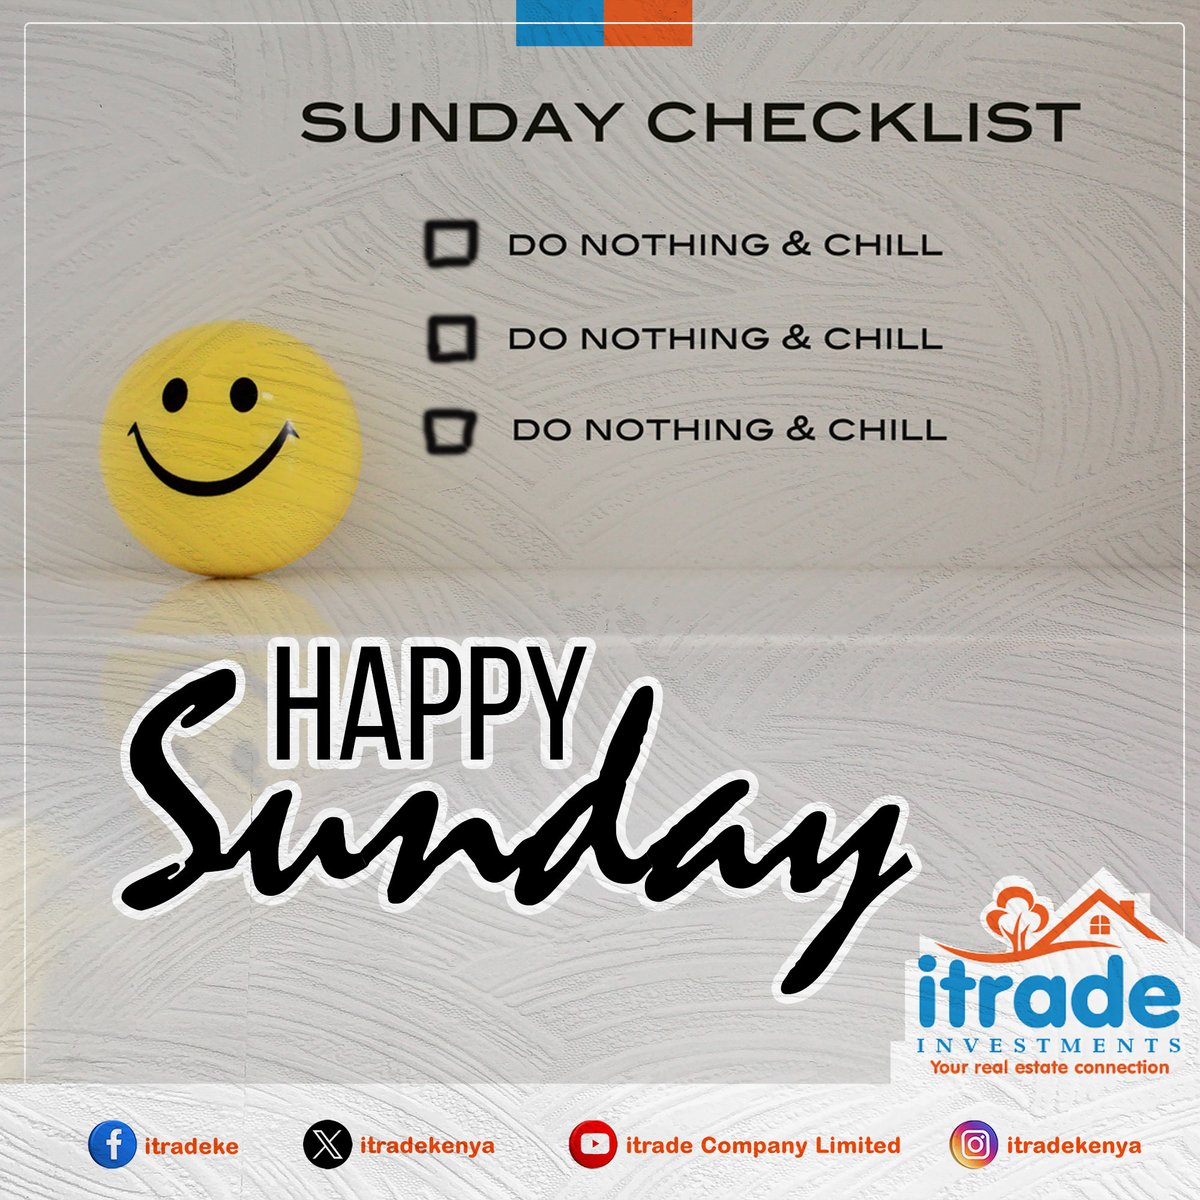 Sunday Checklist: 𝐃𝐨 𝐍𝐨𝐭𝐡𝐢𝐧𝐠 & 𝐂𝐡𝐢𝐥𝐥

✅ Lounge in your coziest spot
✅ Embrace the art of relaxation
✅ Indulge in guilt-free laziness

Take today as your personal permission to unwind, recharge, and simply be. Happy Sunday! 🛋️☕
#SelfCareSunday #ChillModeActivated